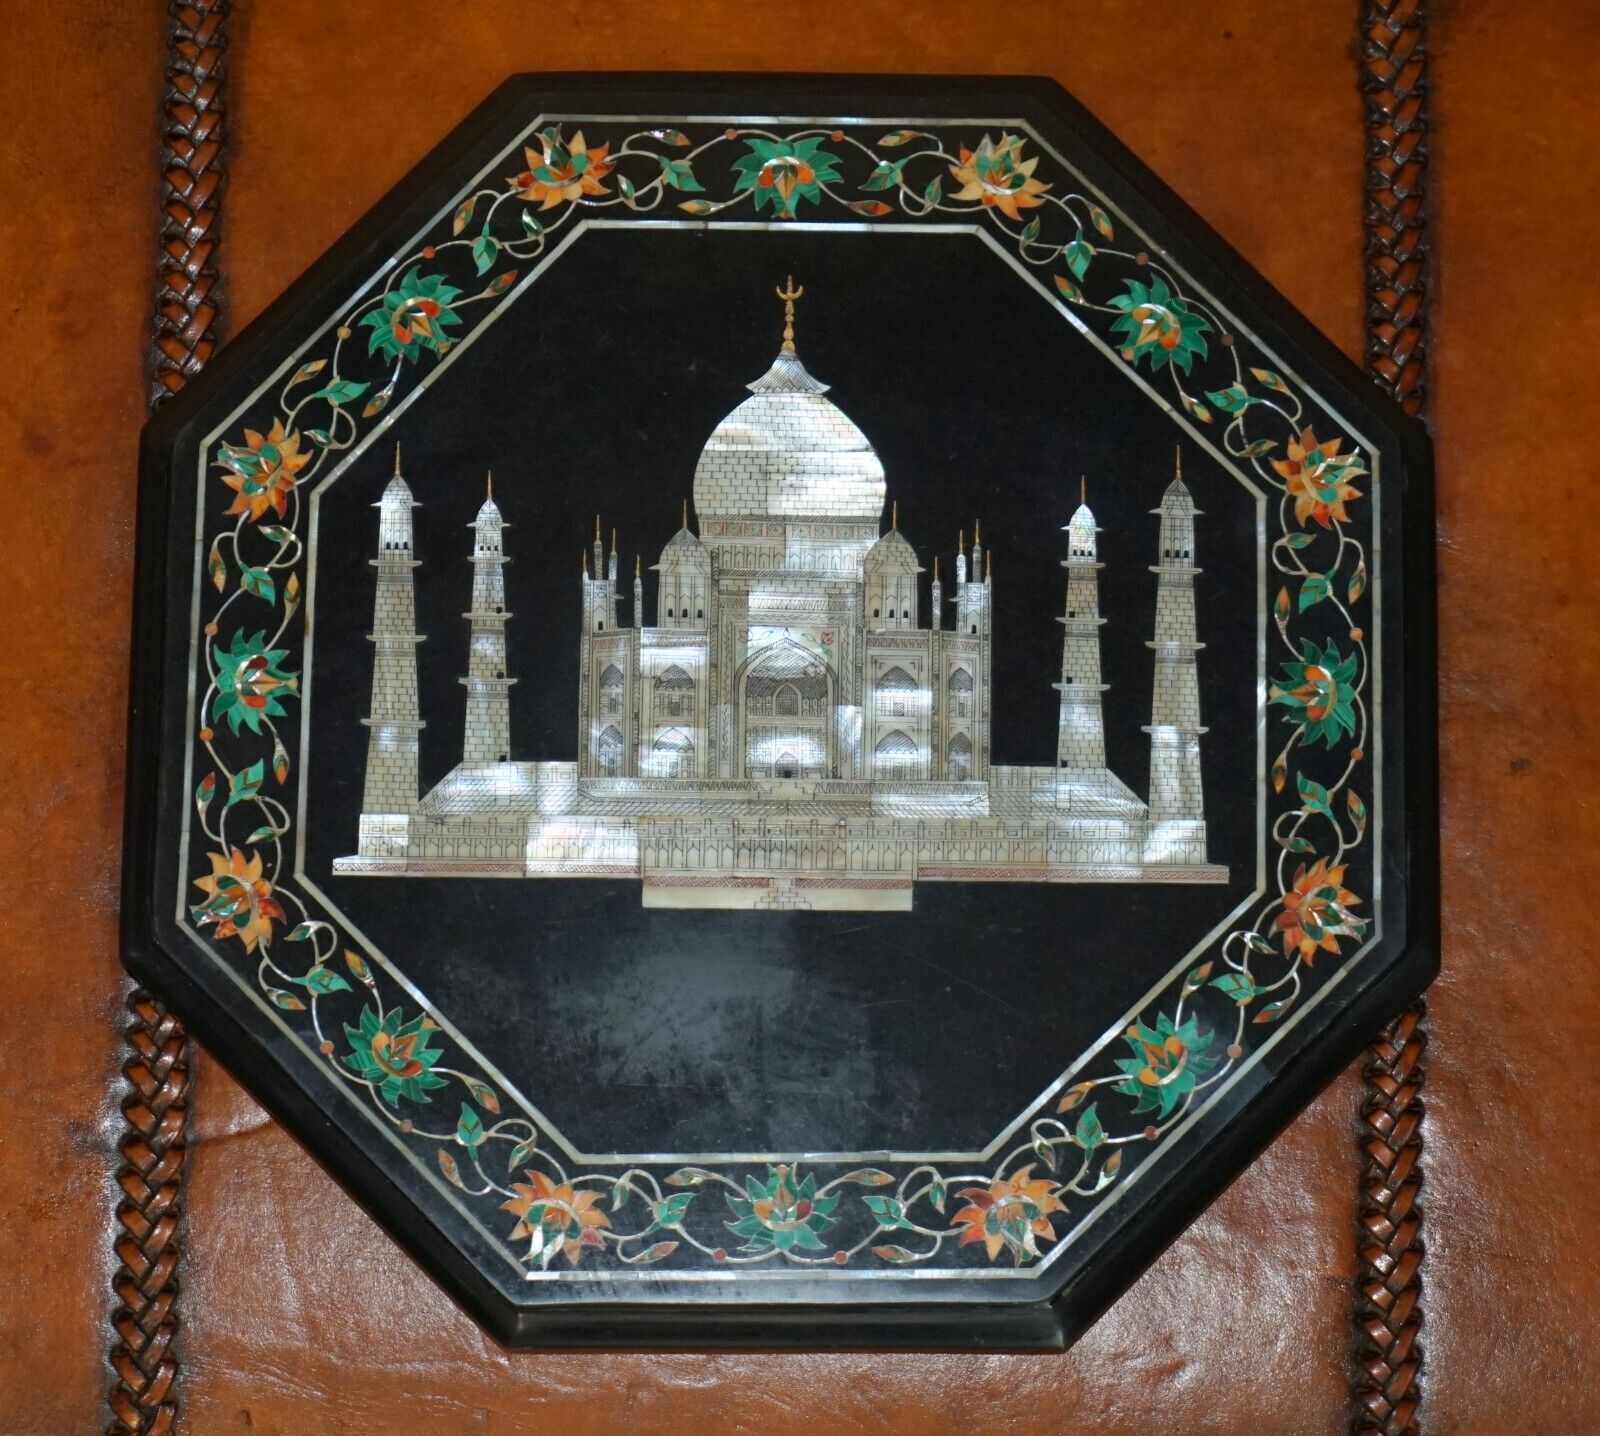 EXQUISITE PIETRA DURA MARBLE & MOTHER OF PEARL TABLE TOP DEPICTING THE TAJ MAHAL